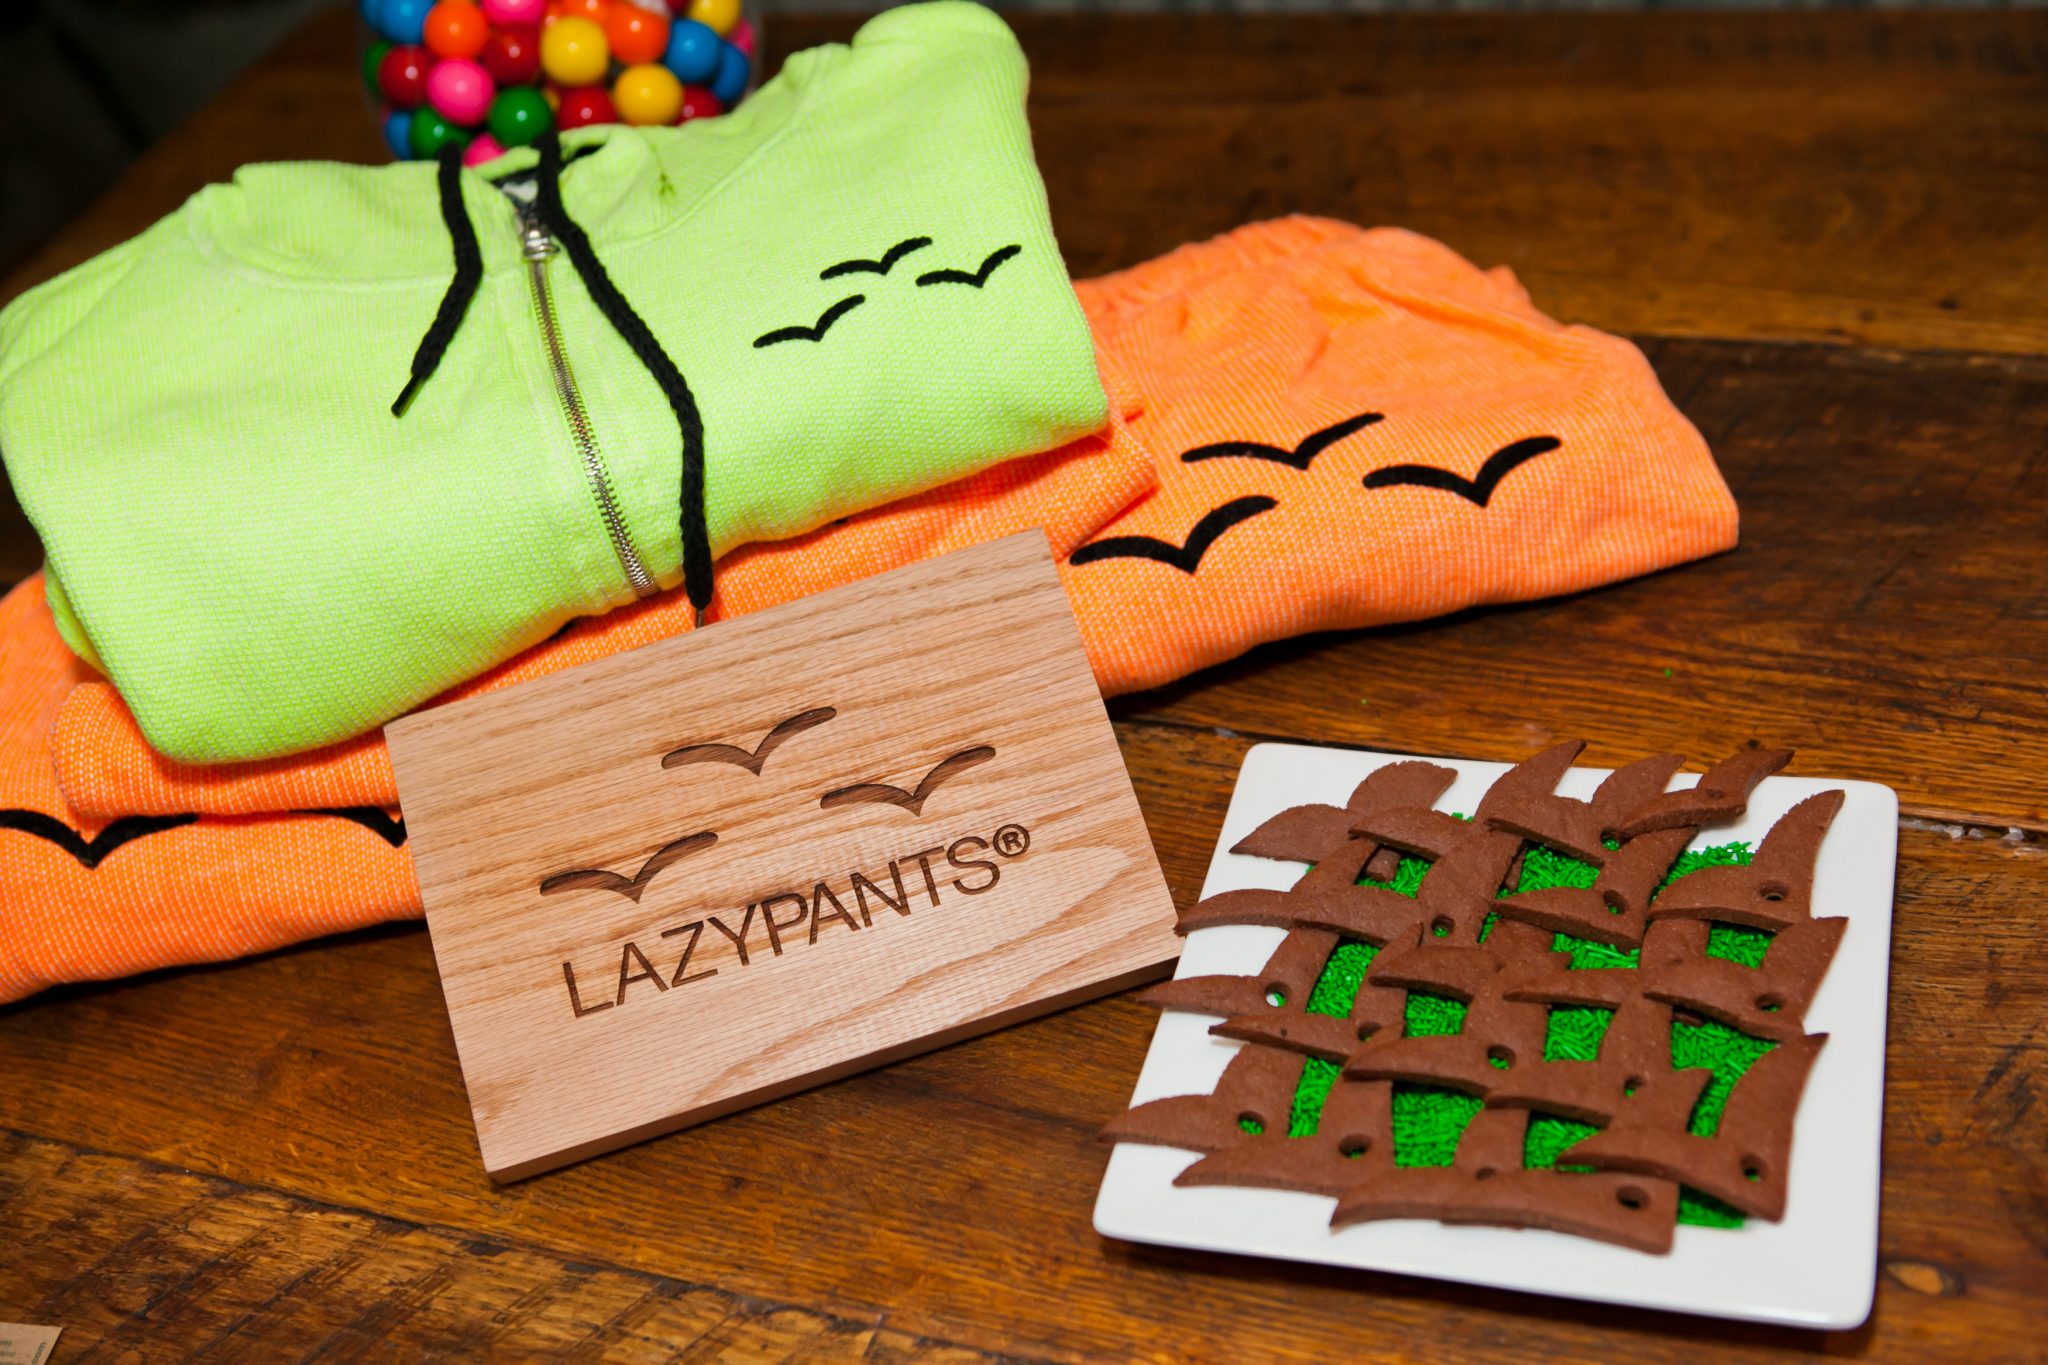 Beyond the Basics: Lazypants Launches Spring/Summer 2013 Fashions